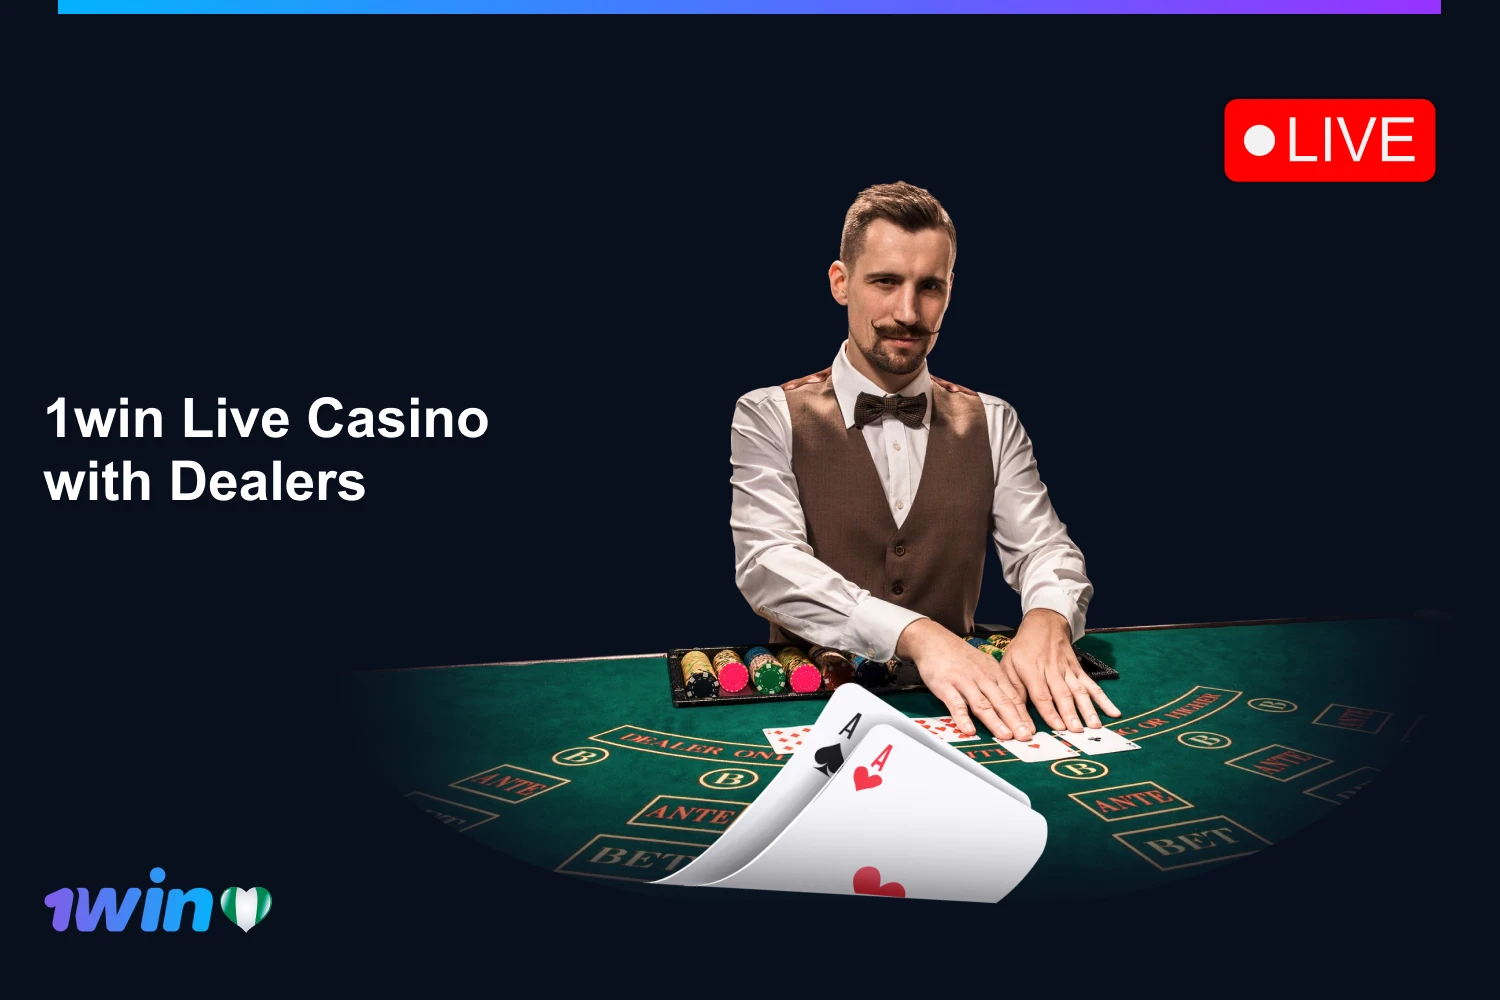 1win casino offers players from Nigeria to play over 500 games with professional live dealers